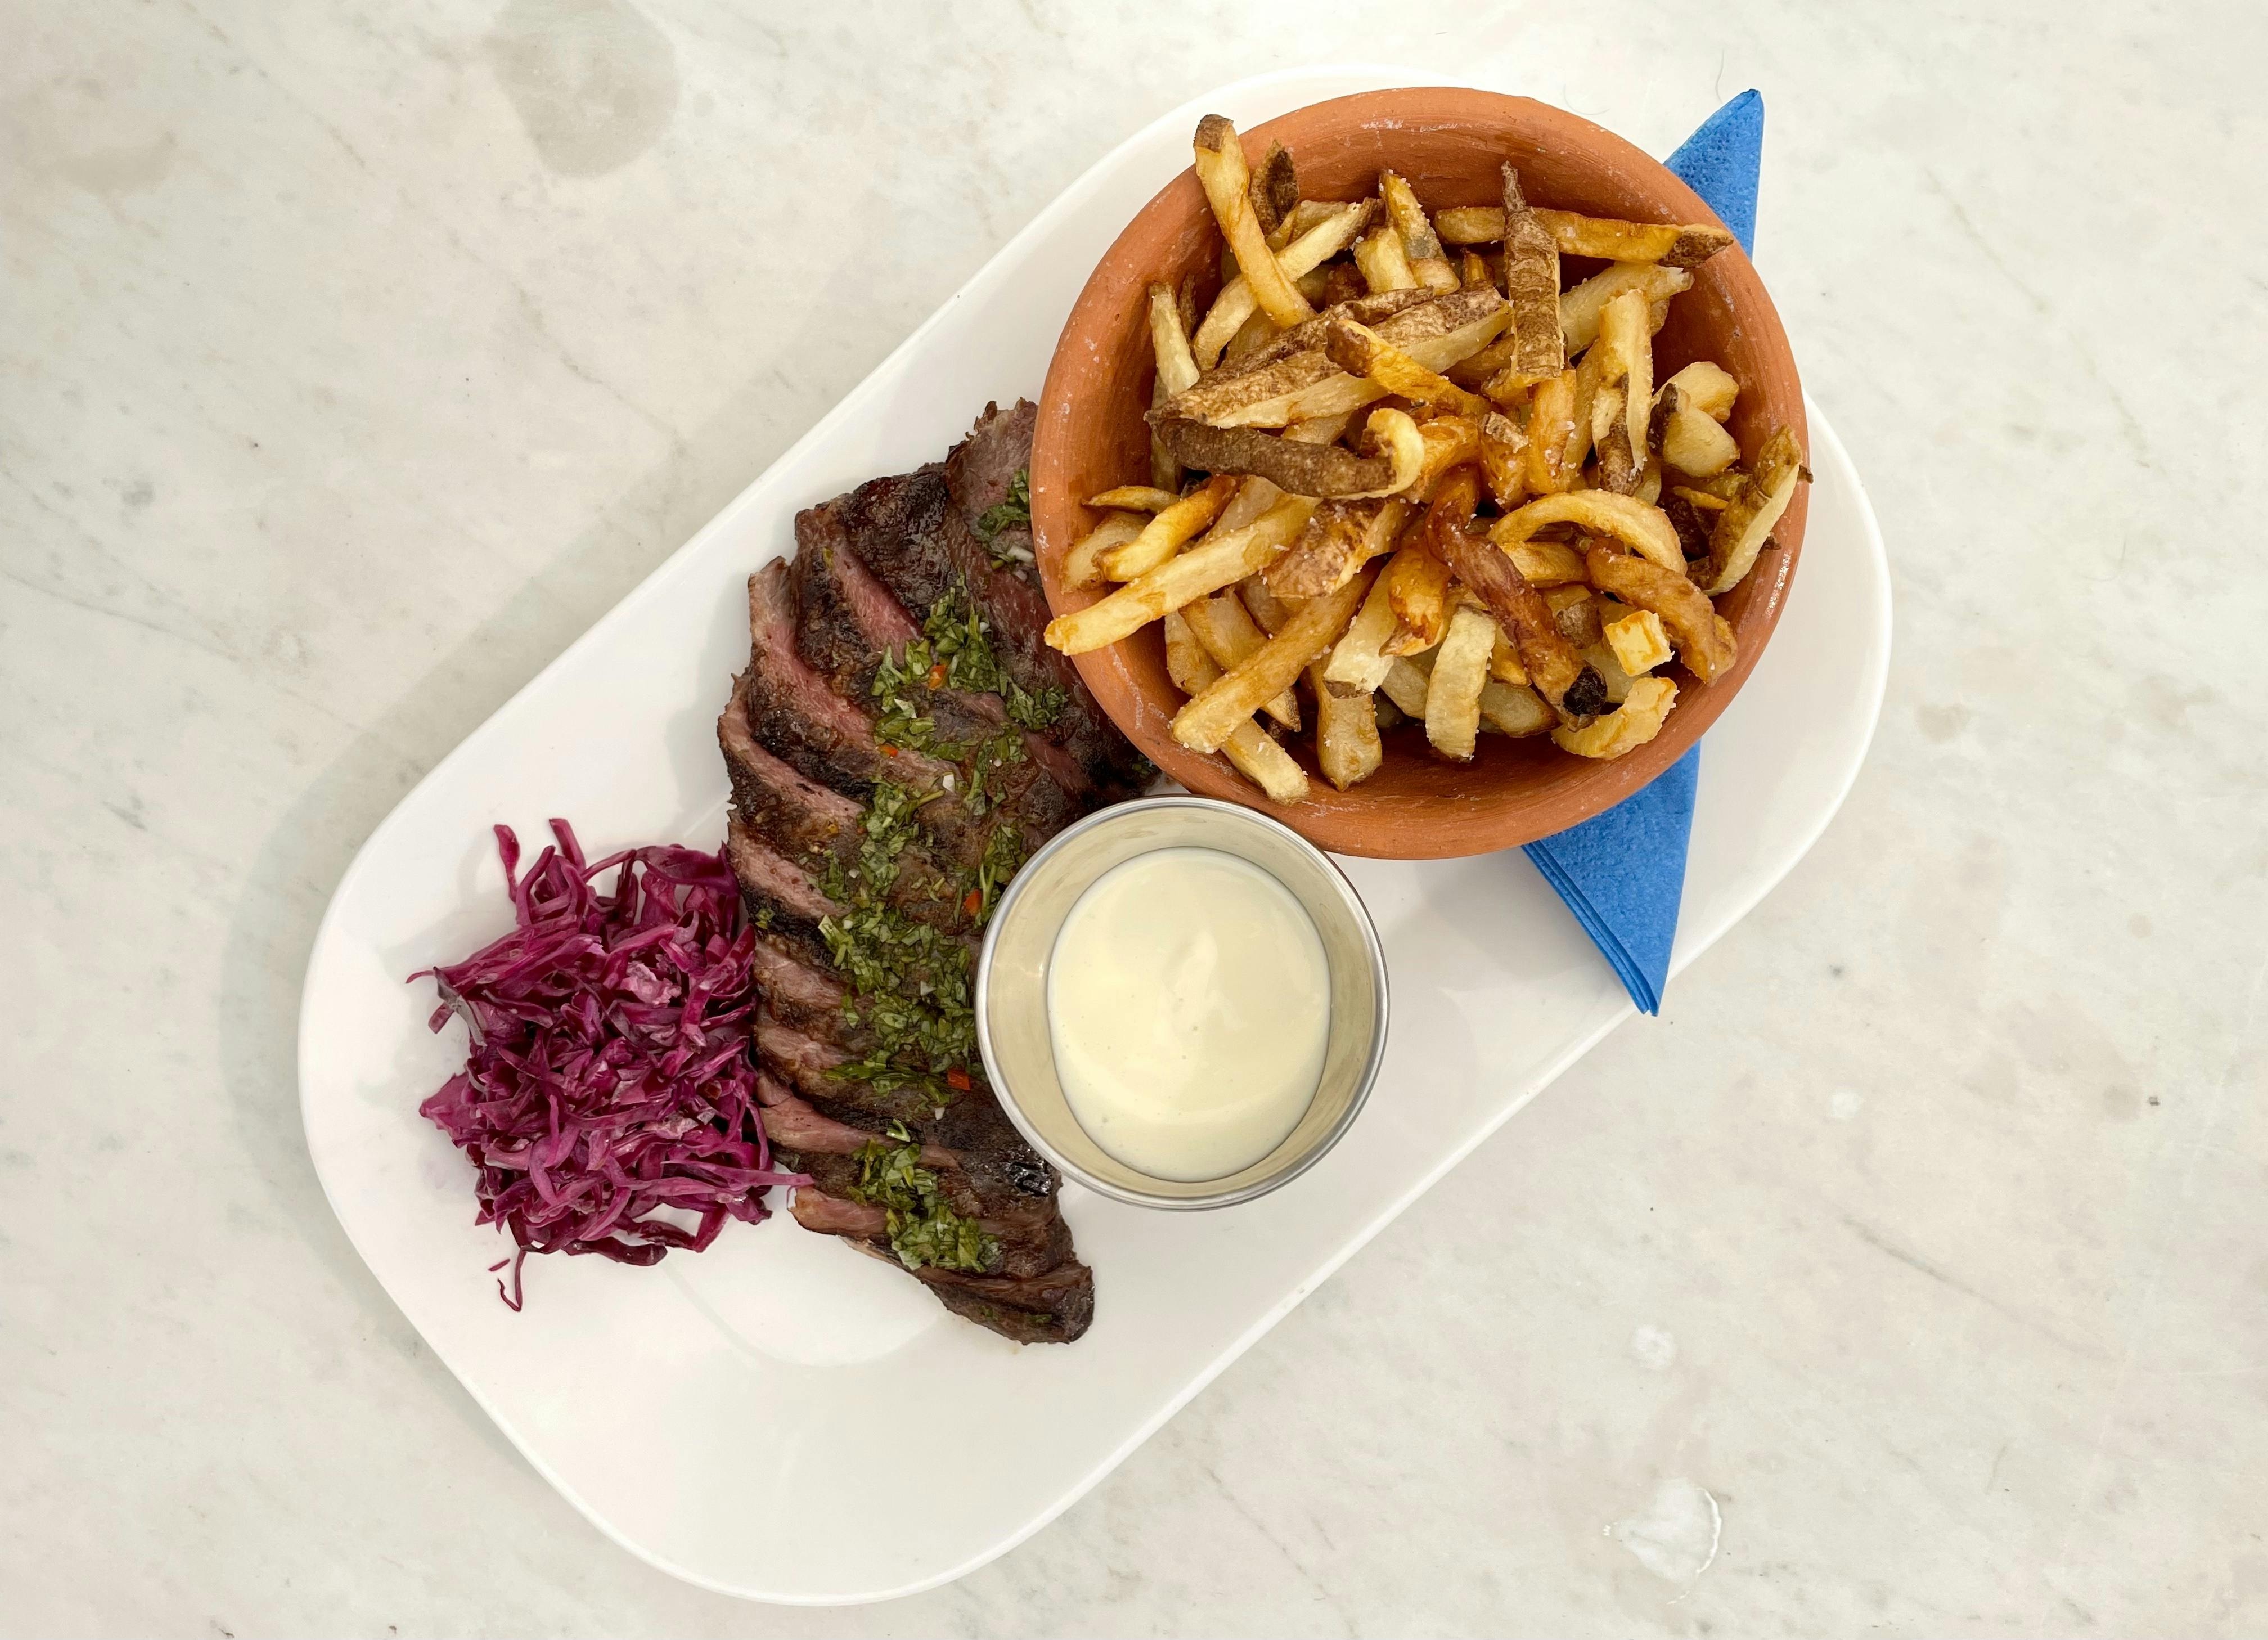 Steak Frites with red cabbage slaw